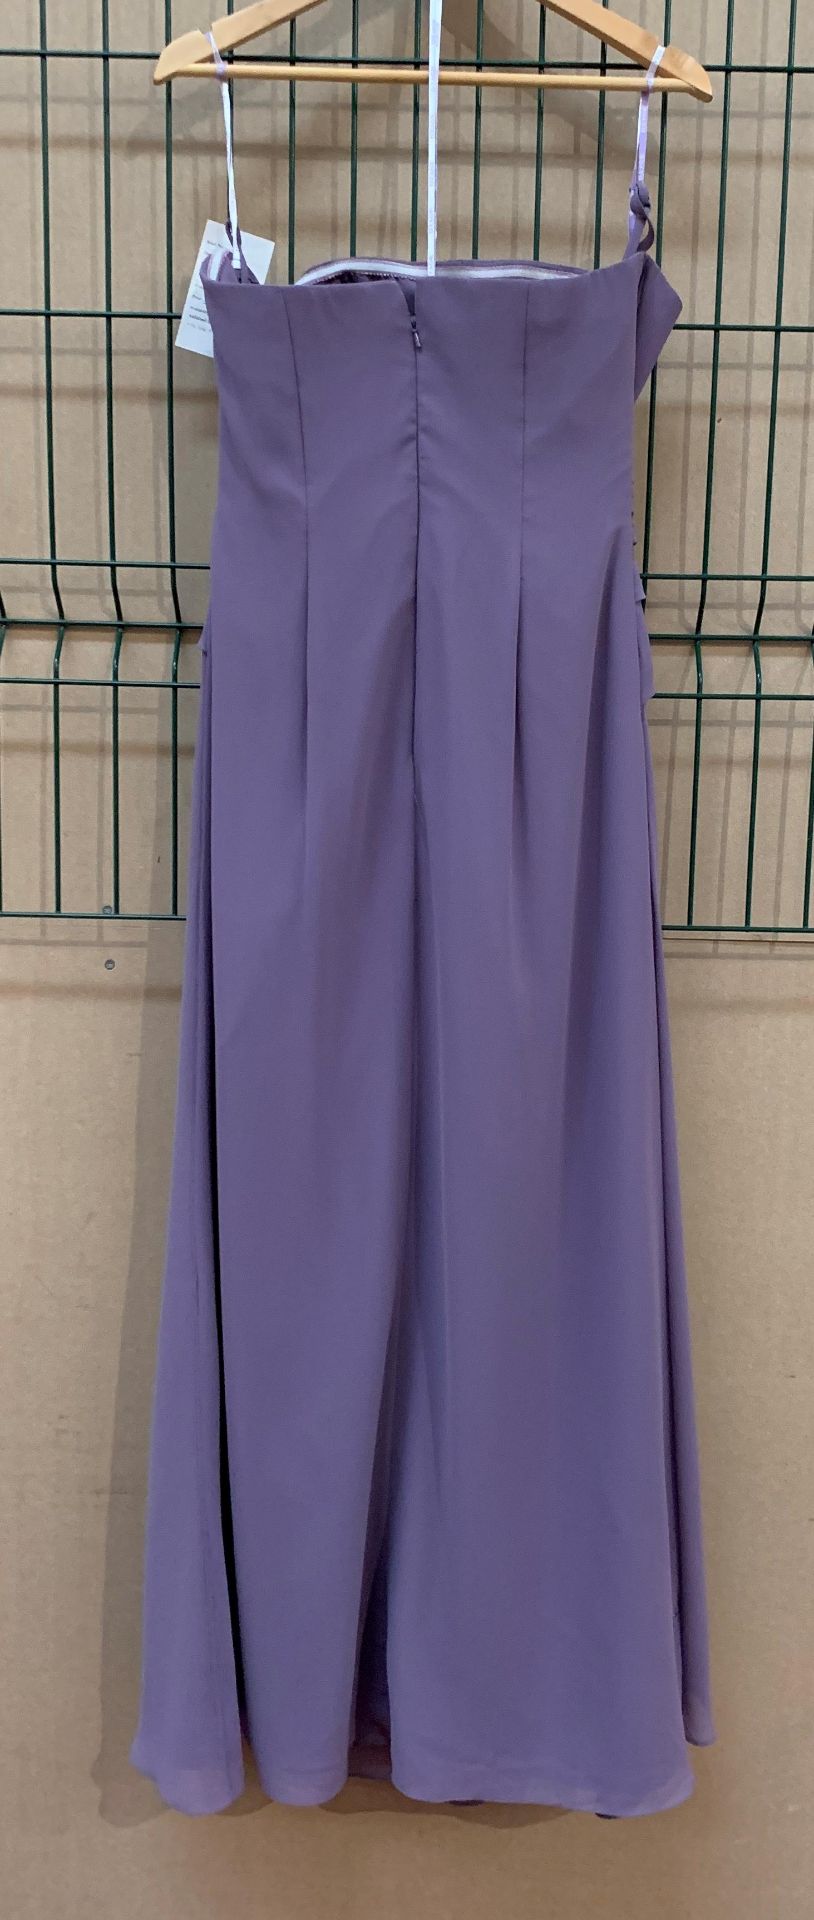 A bridesmaid/prom dress by D'zage, Derby - Image 2 of 2